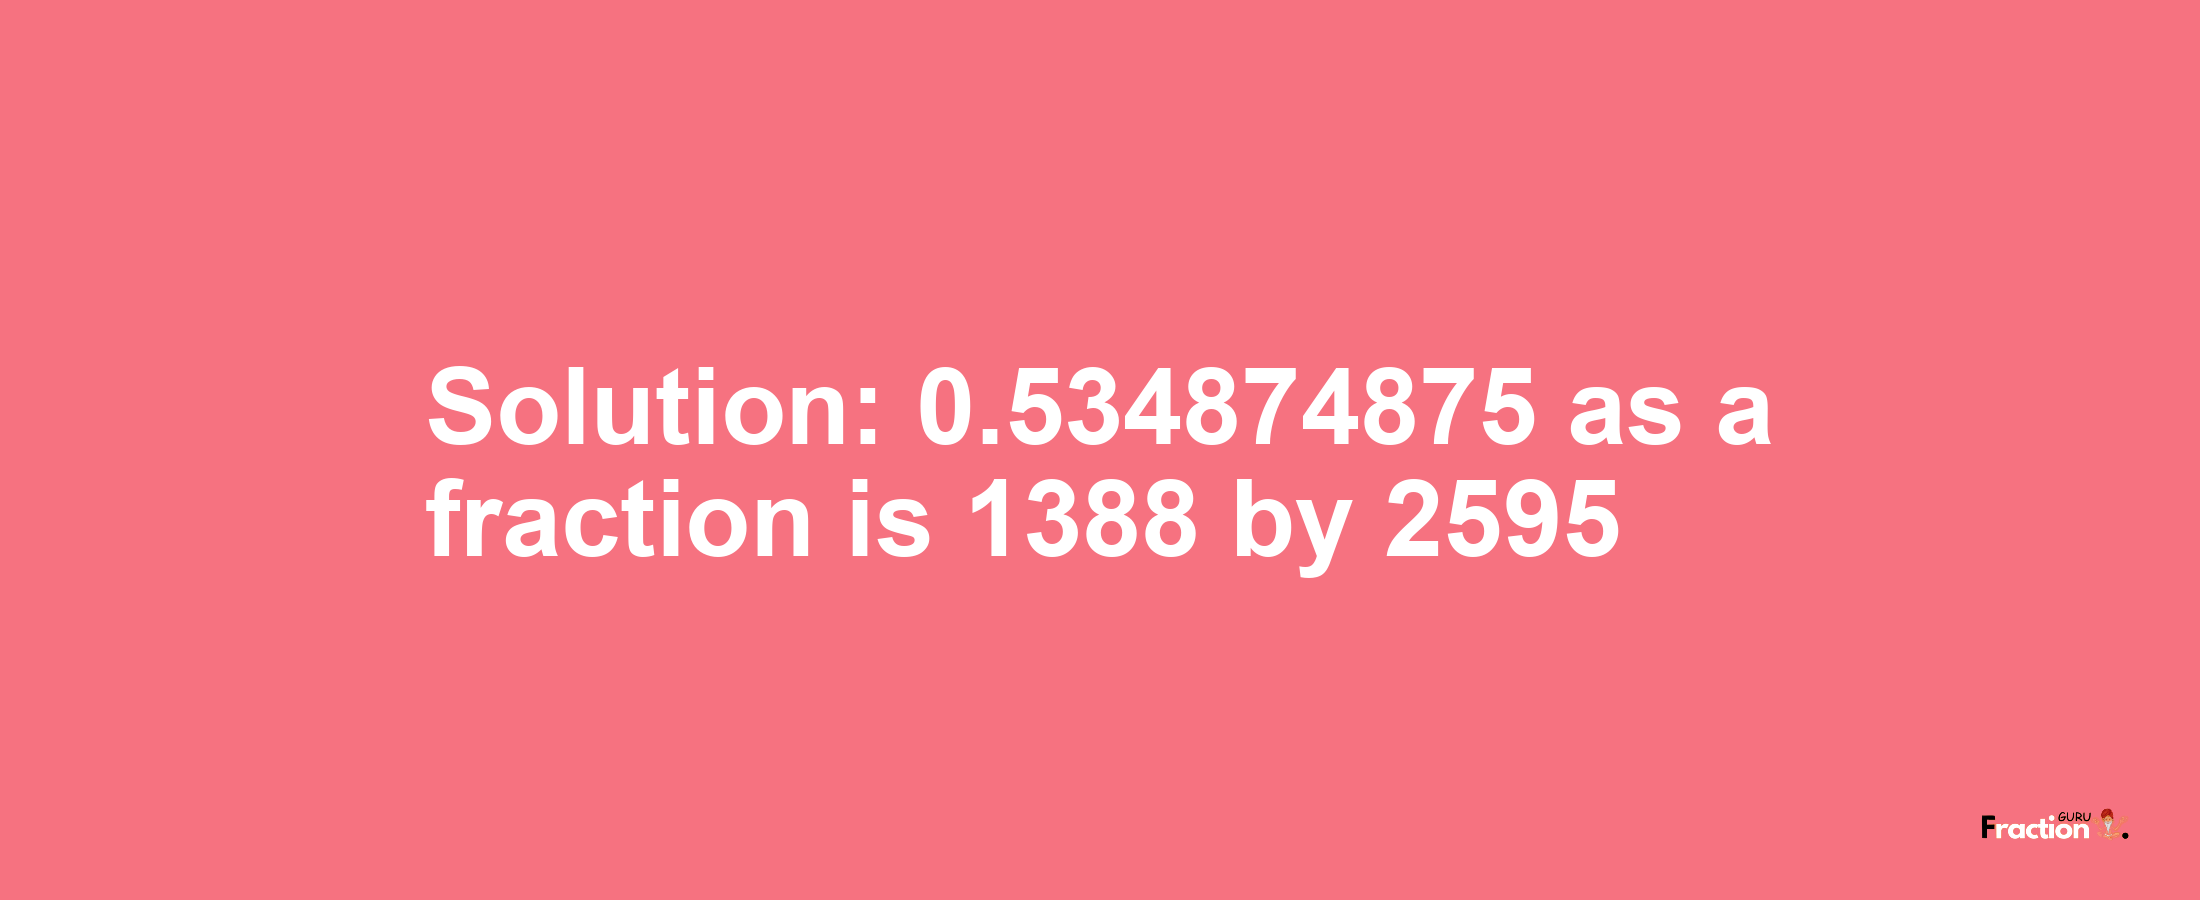 Solution:0.534874875 as a fraction is 1388/2595